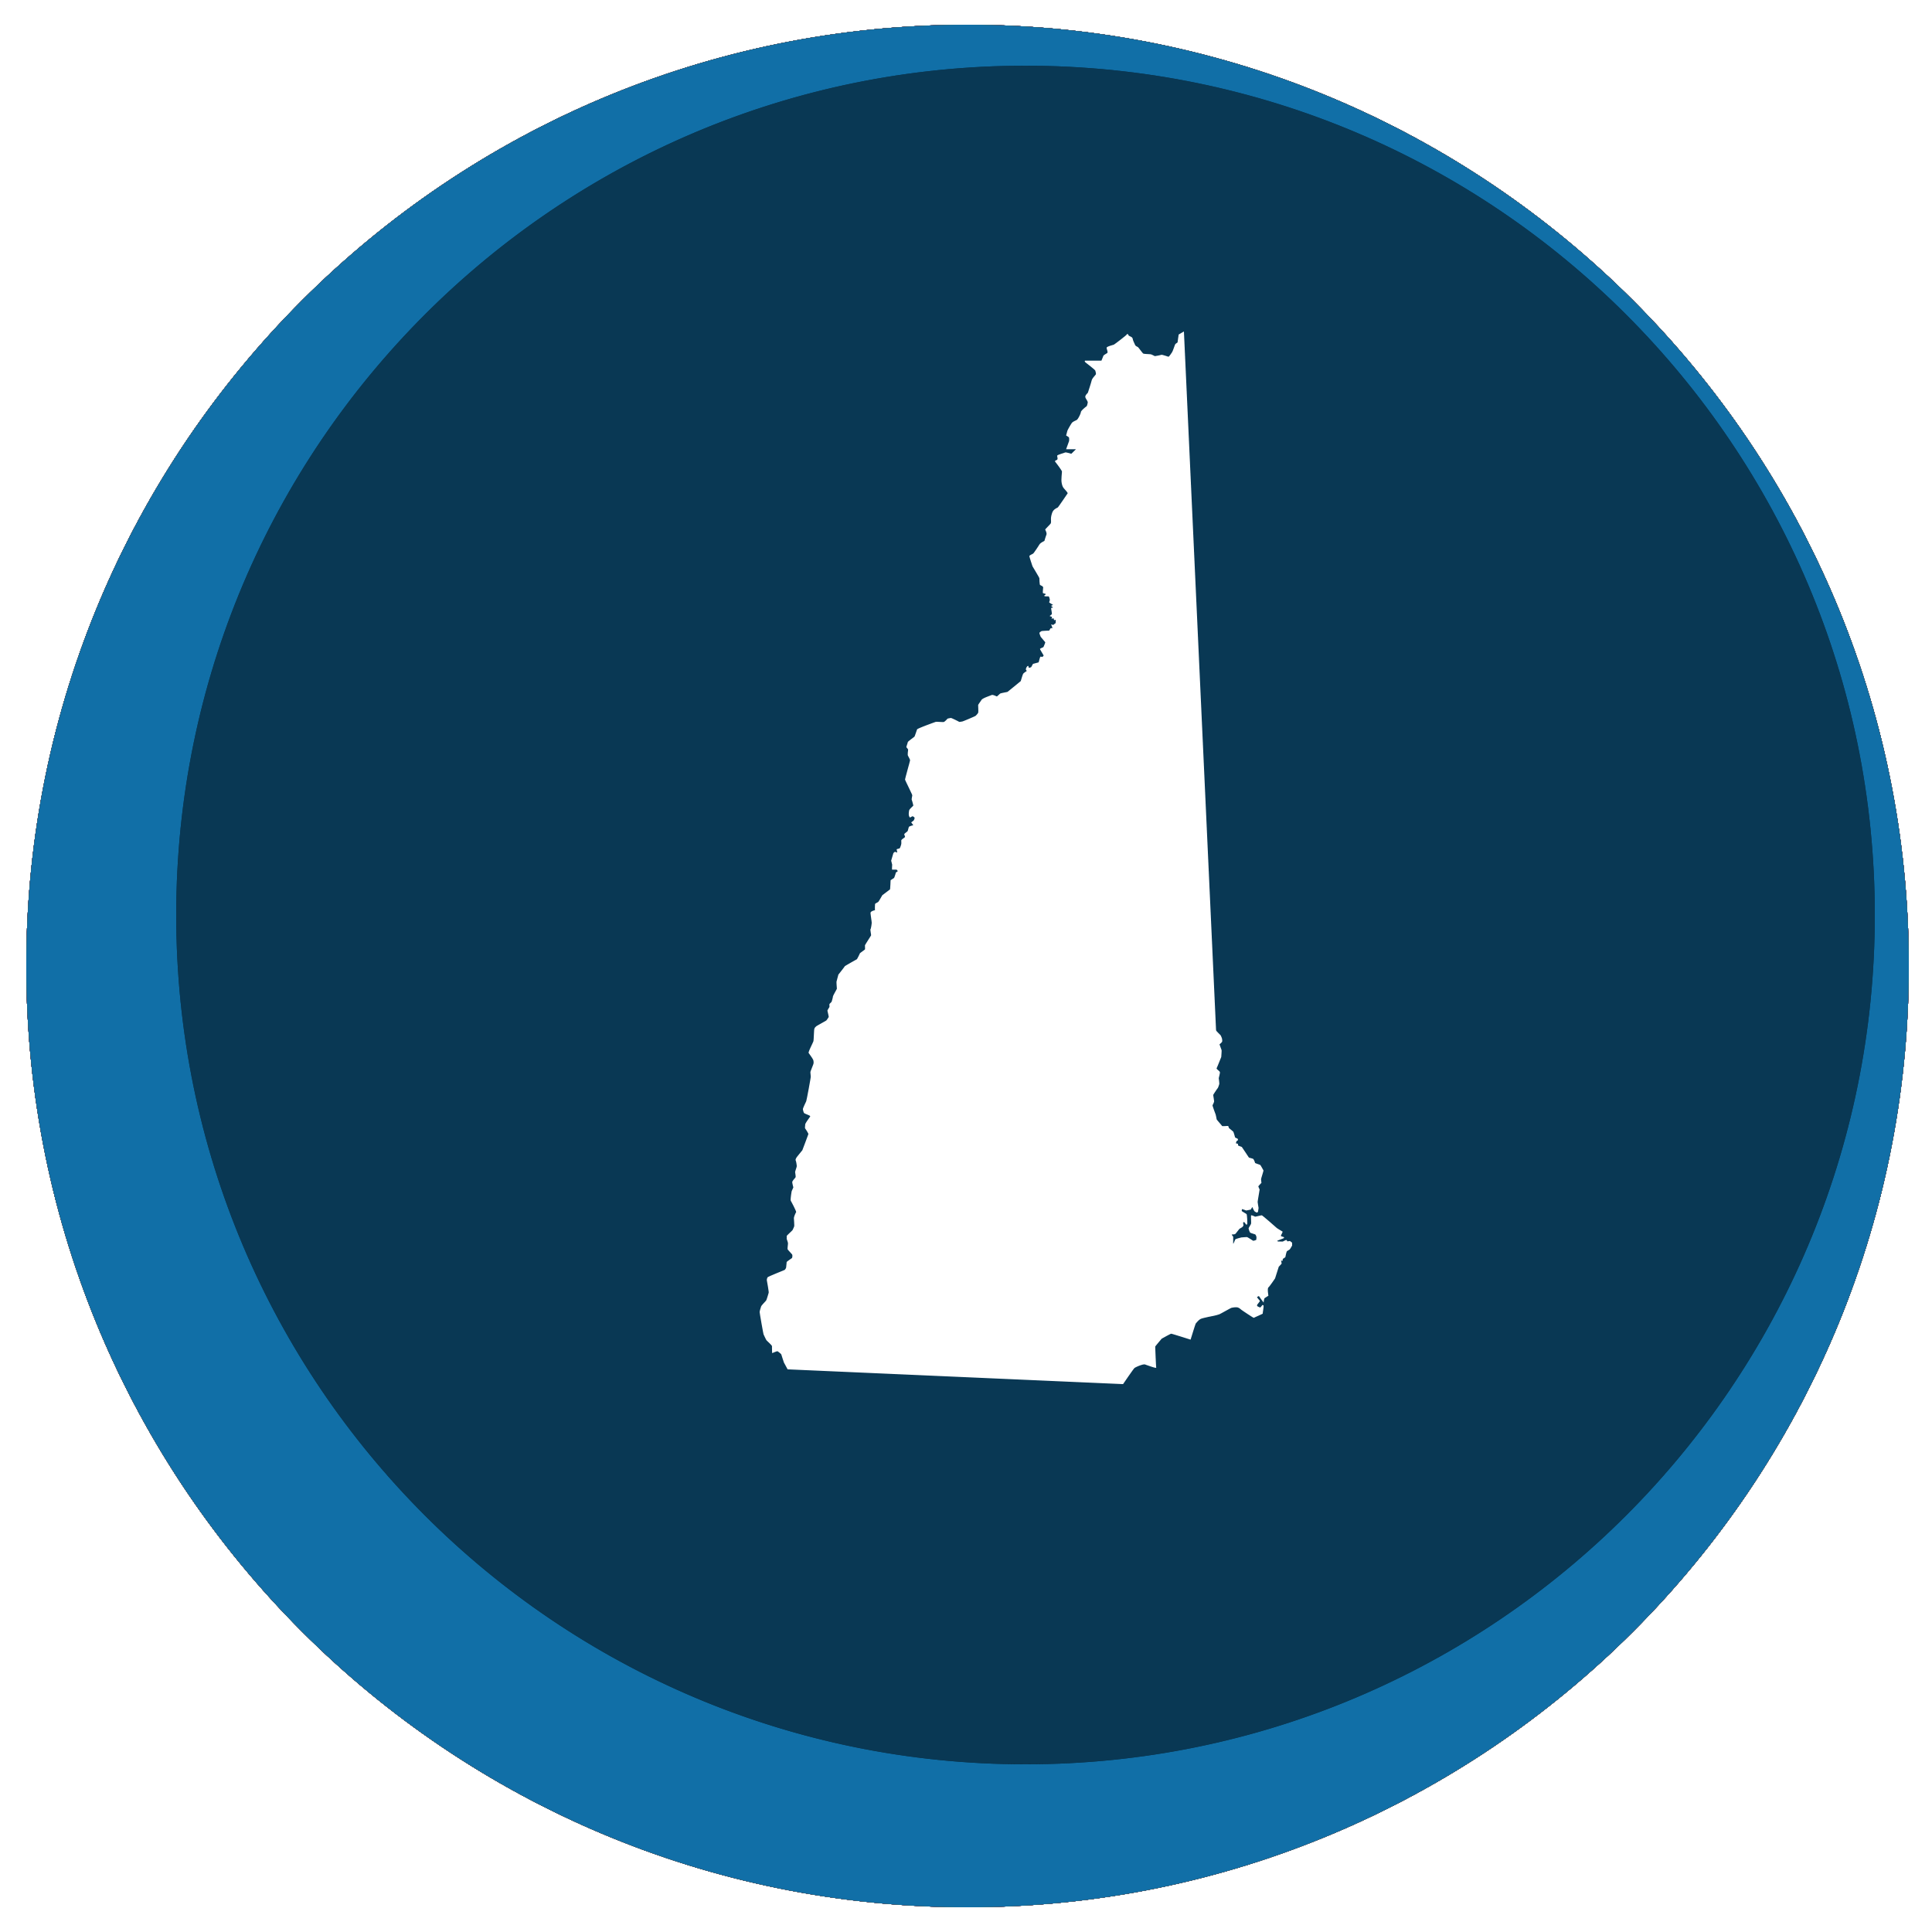 New Hampshire state shape in a circle